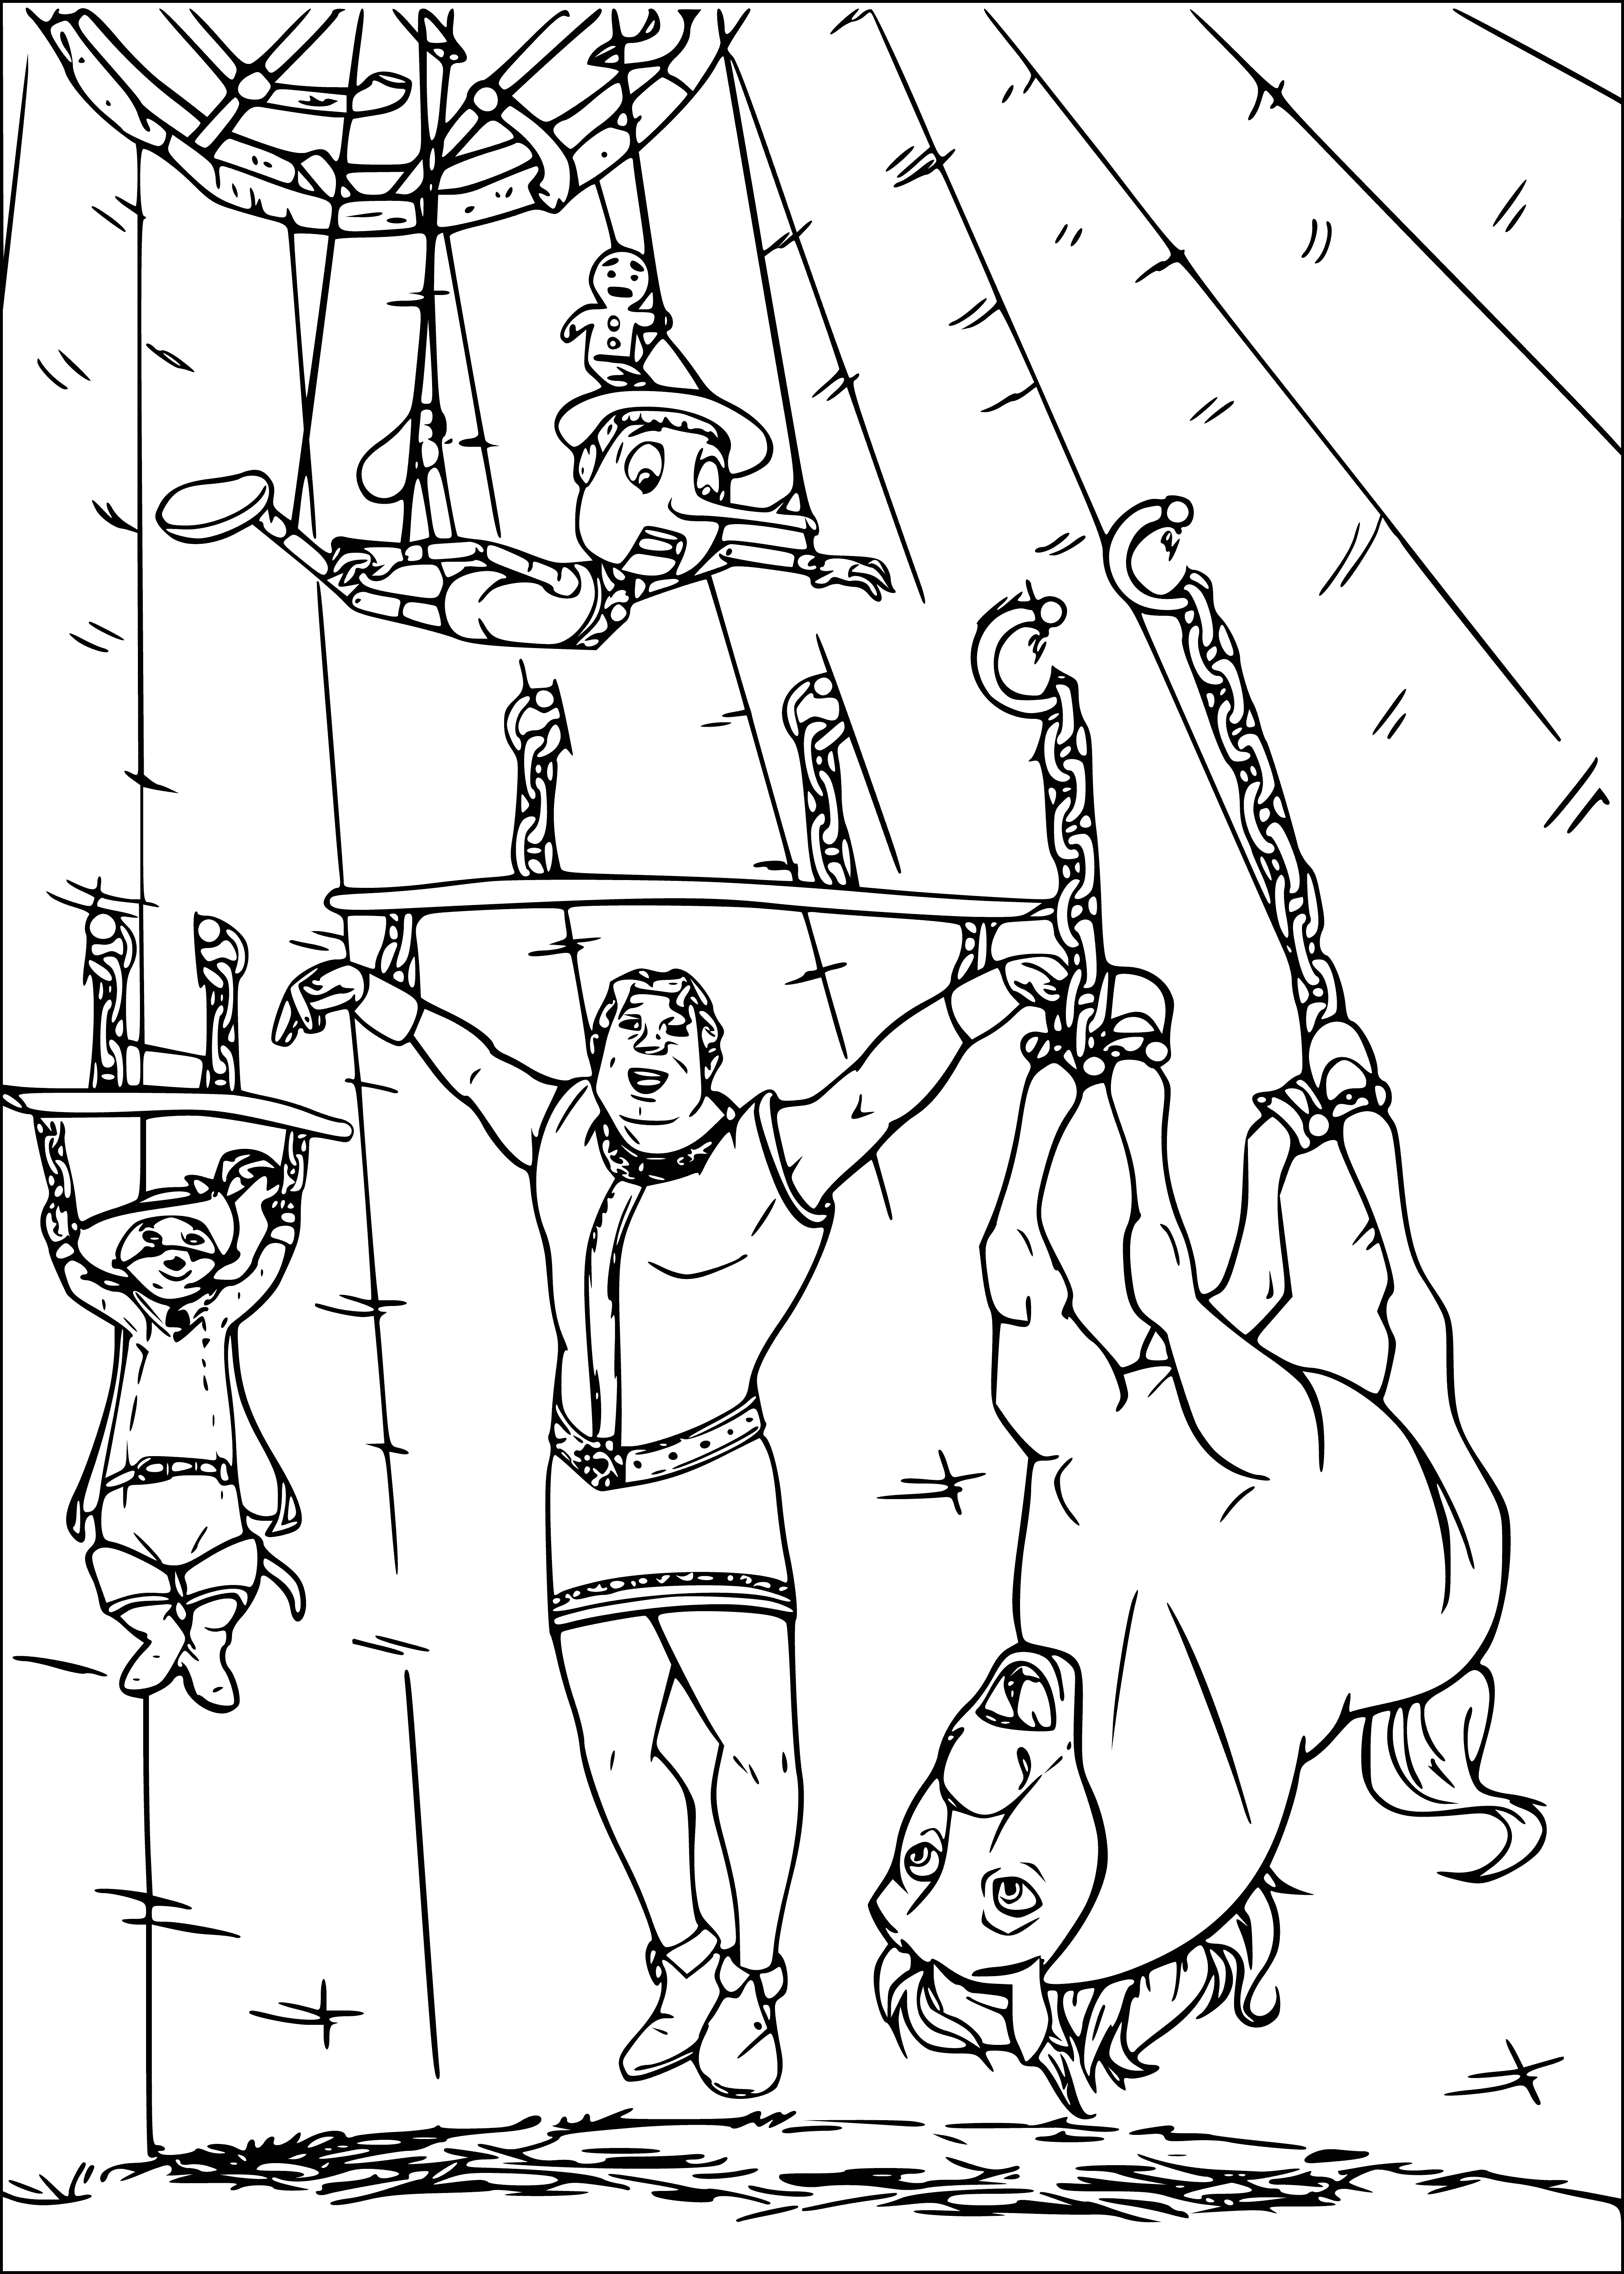 In the dungeon coloring page